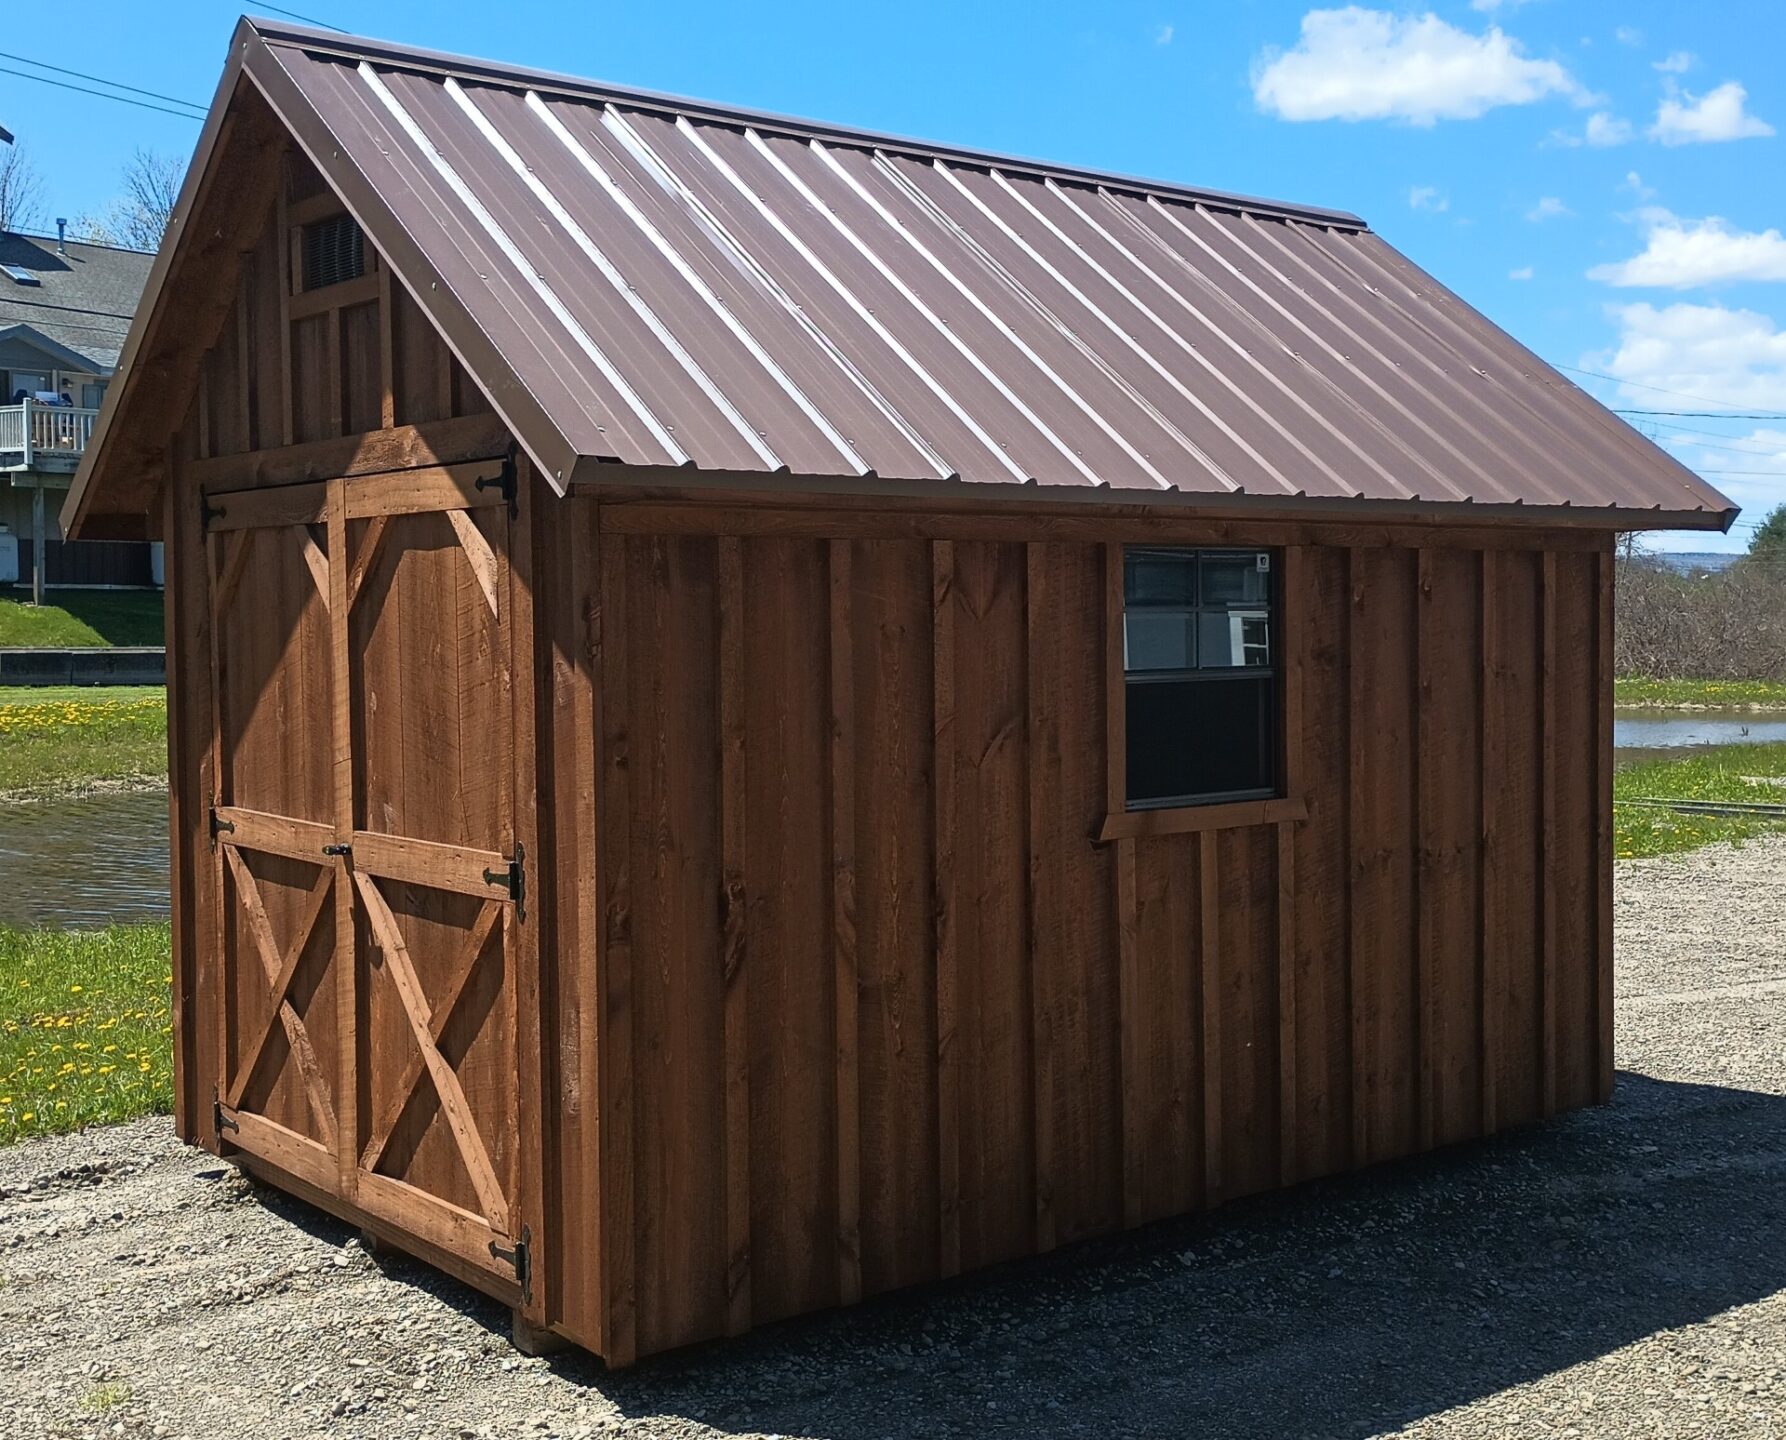 Cape Cod roofline shed with double doors and brown metal roof